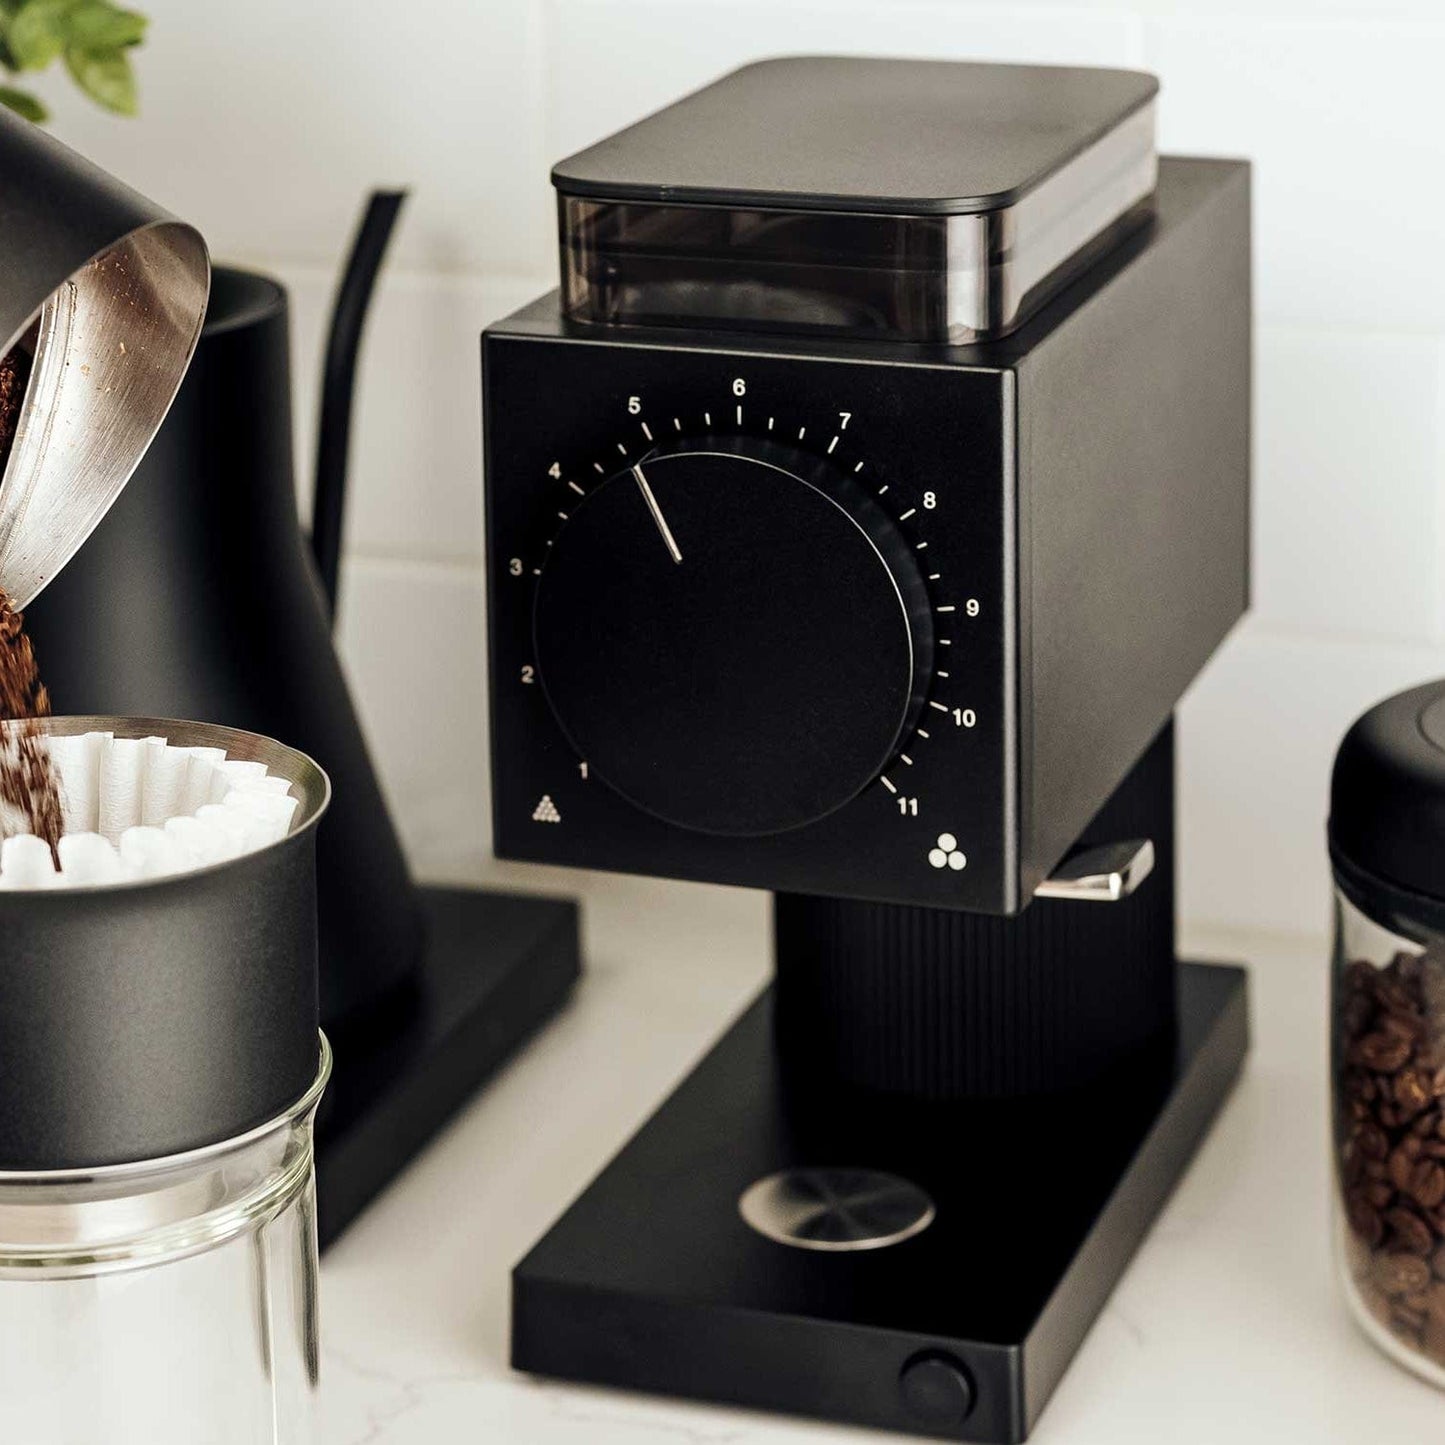 Fellow Fellow Stagg EKG black with Ode Gen1 Electric Coffee grinder